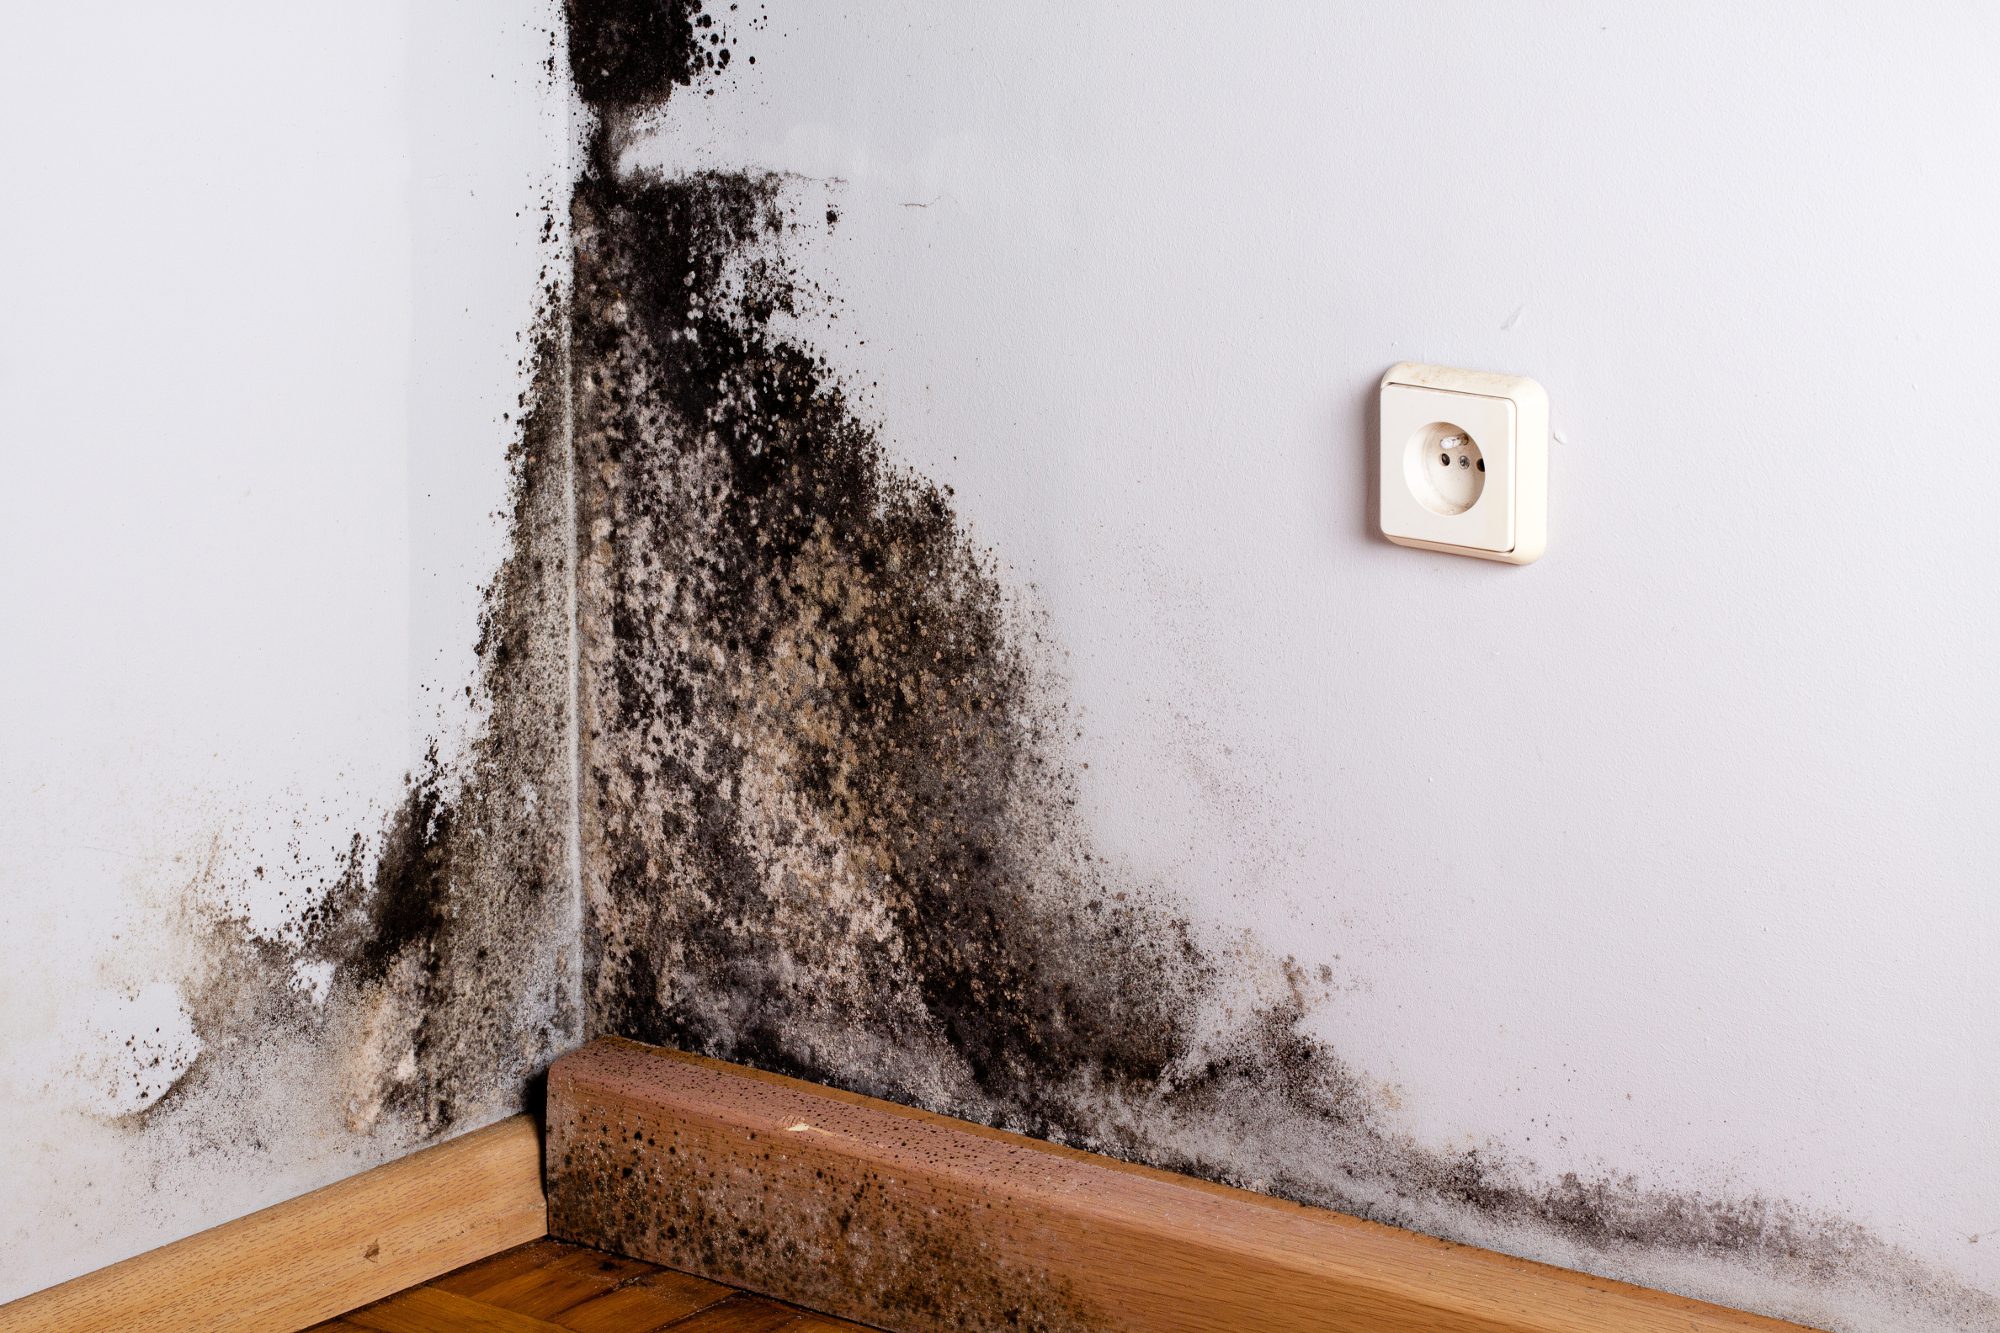 https://advancedmidwest.com/wp-content/uploads/2018/06/mold-in-the-home.jpg